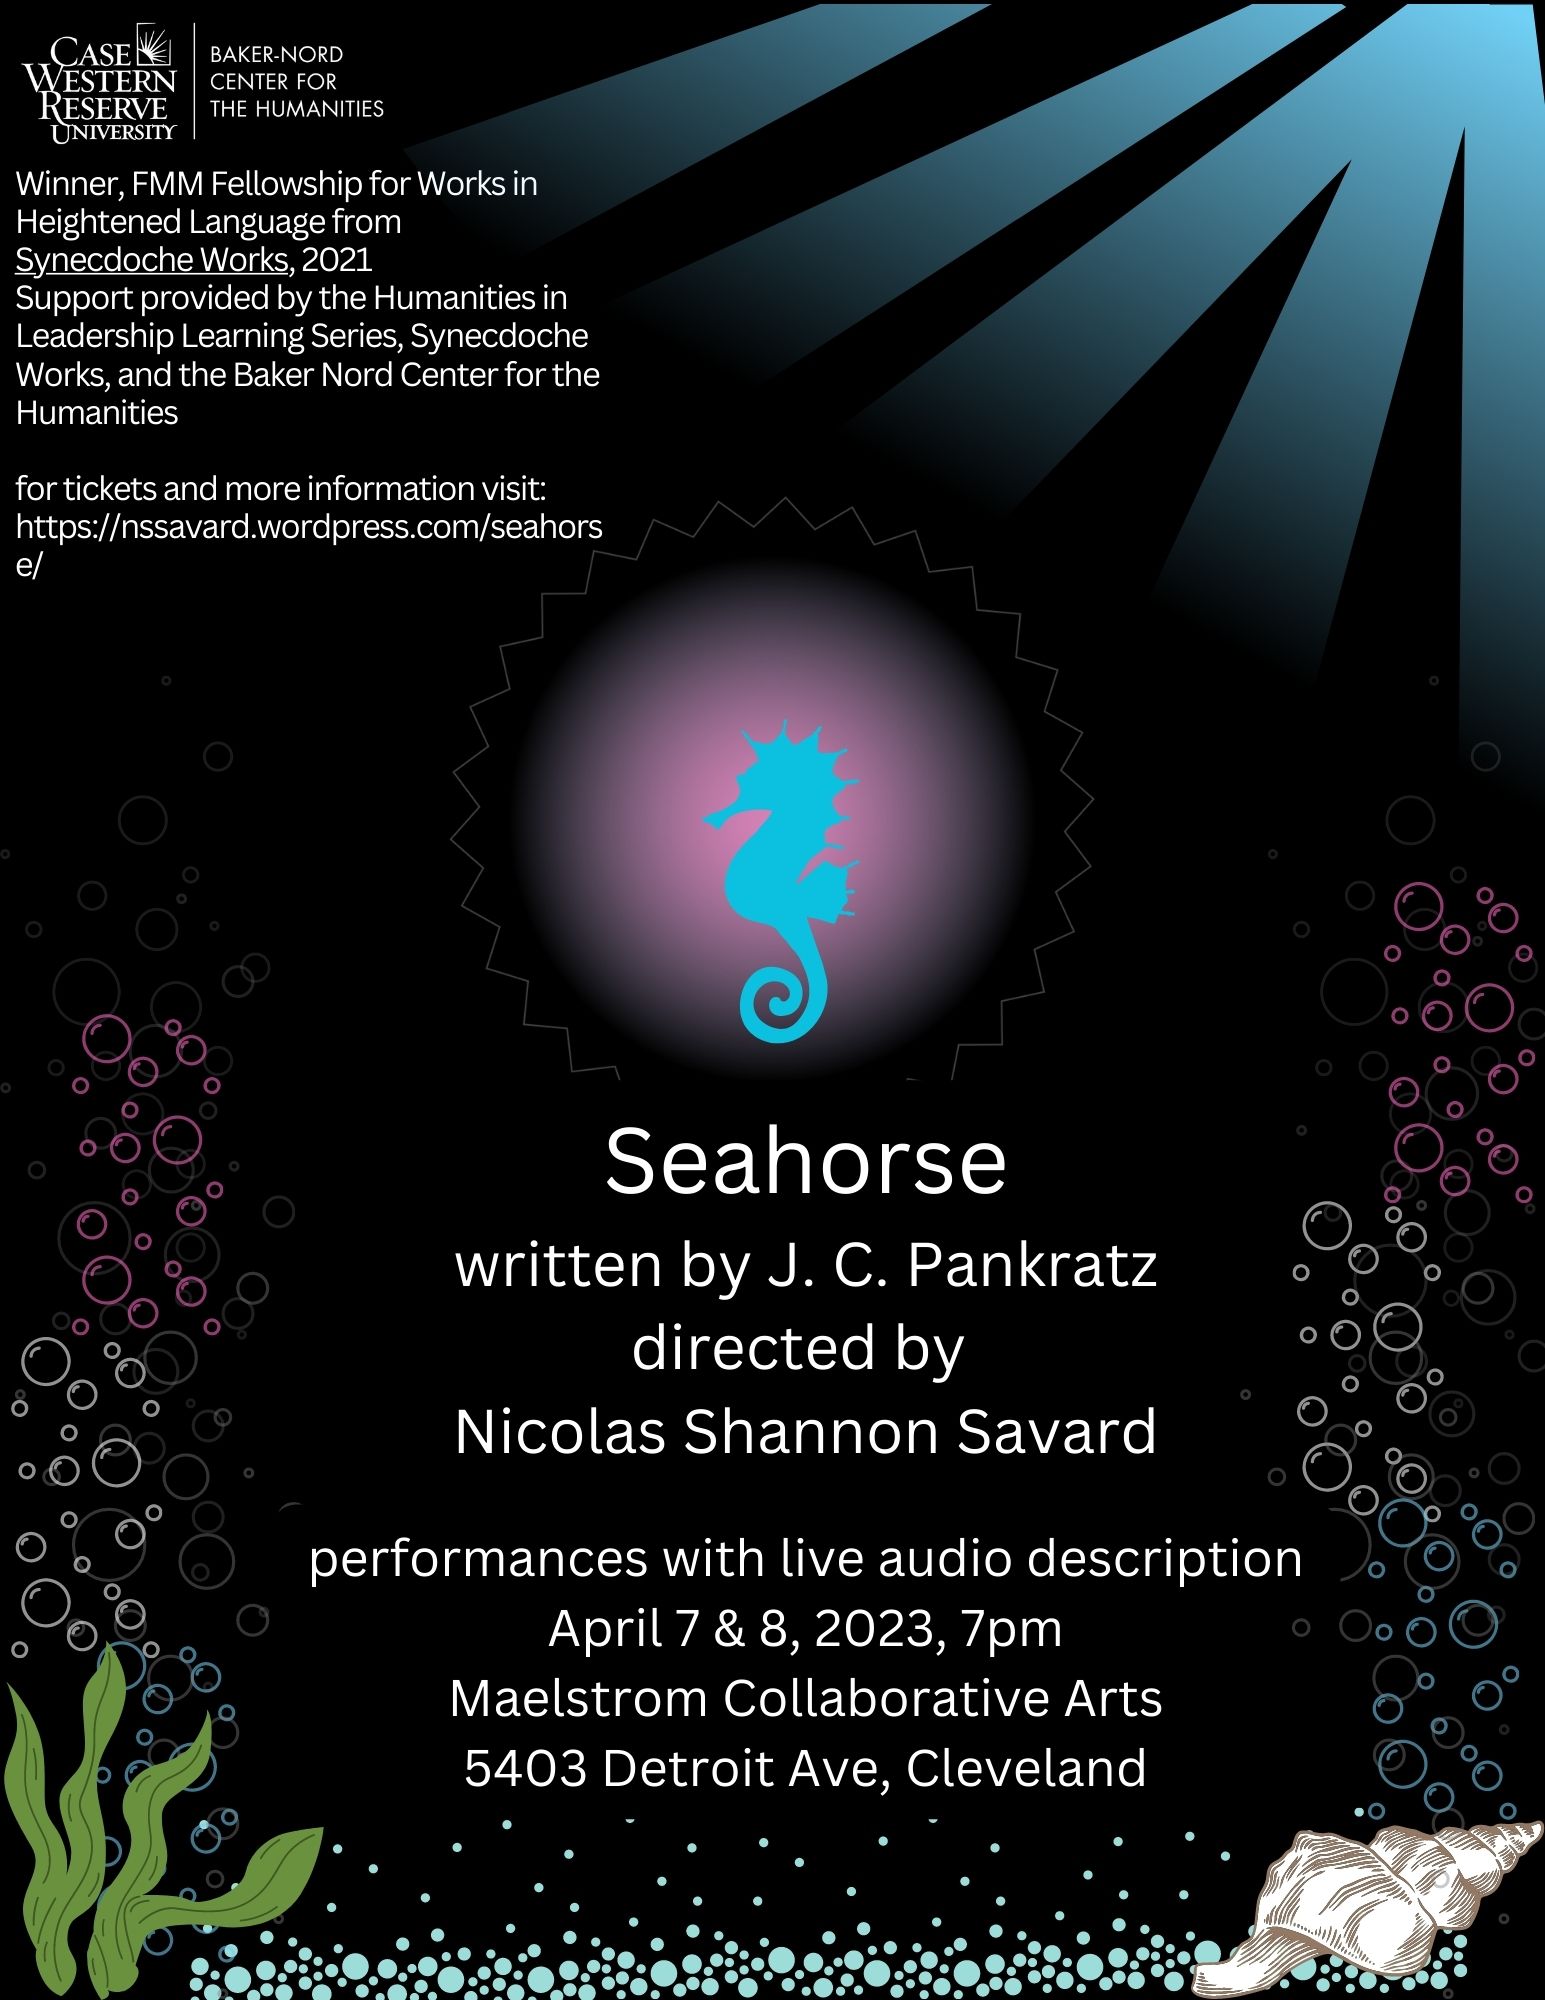 Poster image: glowing seahorse in surrounded by trans flag colored bubbles